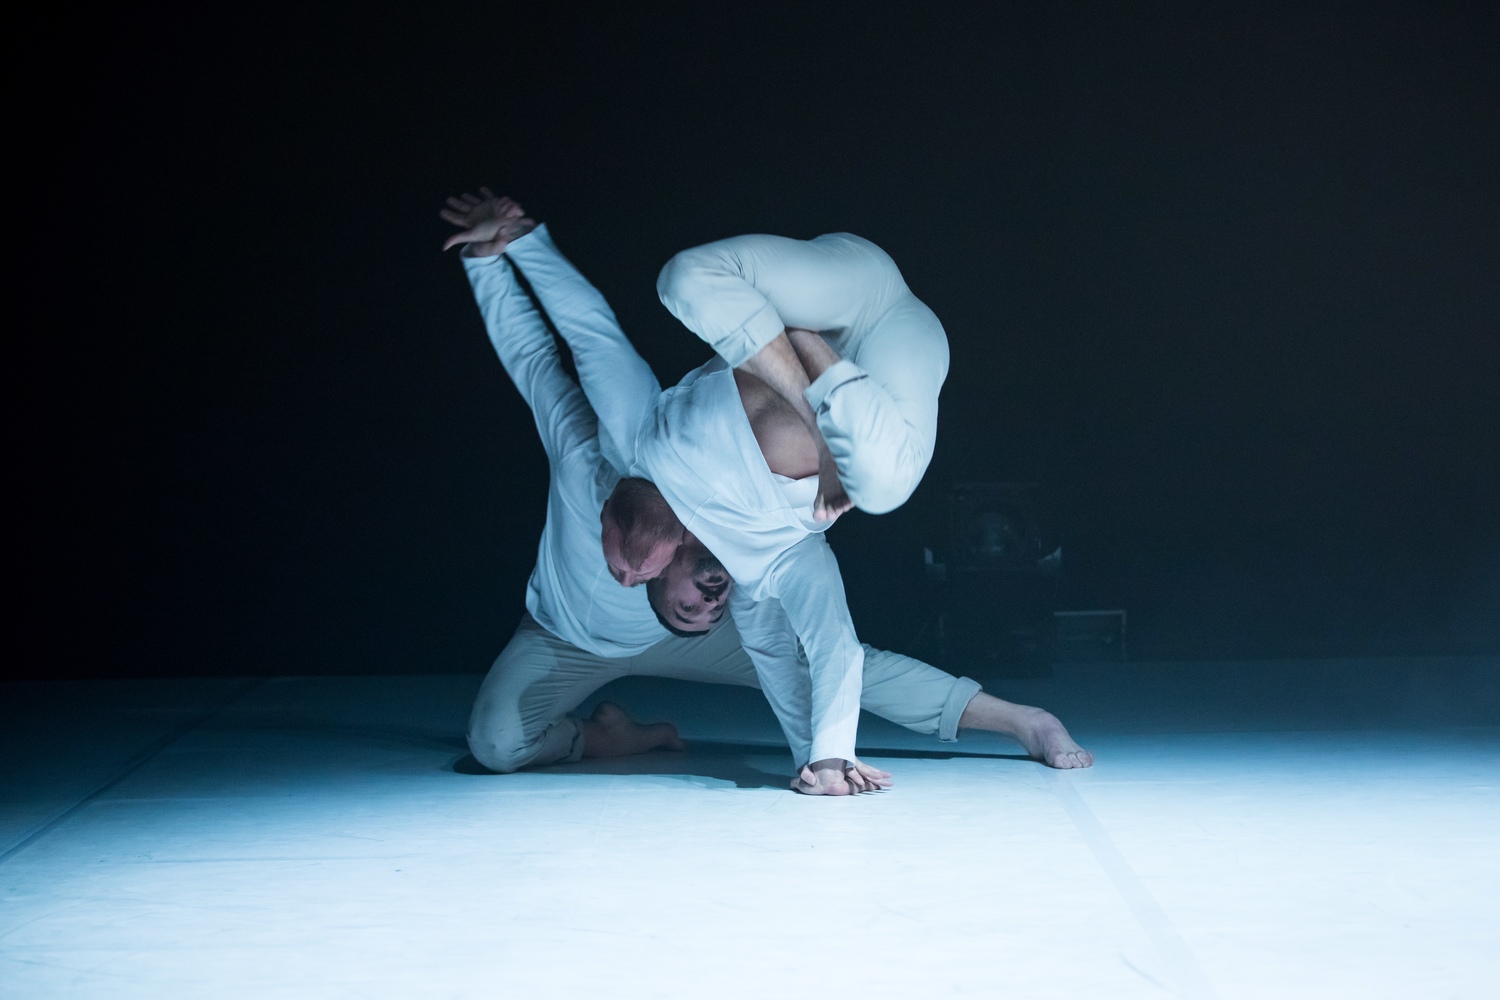 A FUSION OF CONTORTION, HIP-HOP, THREADING, BREAKDANCING AND CONTEMPORARY DANCE. Dance St. Louis kicks off its 53rd season with an arousing presentation of Wewolf, the LA-based company of award-winning international artists James Gregg and RubberLegz (aka Rauf Yasit). 3